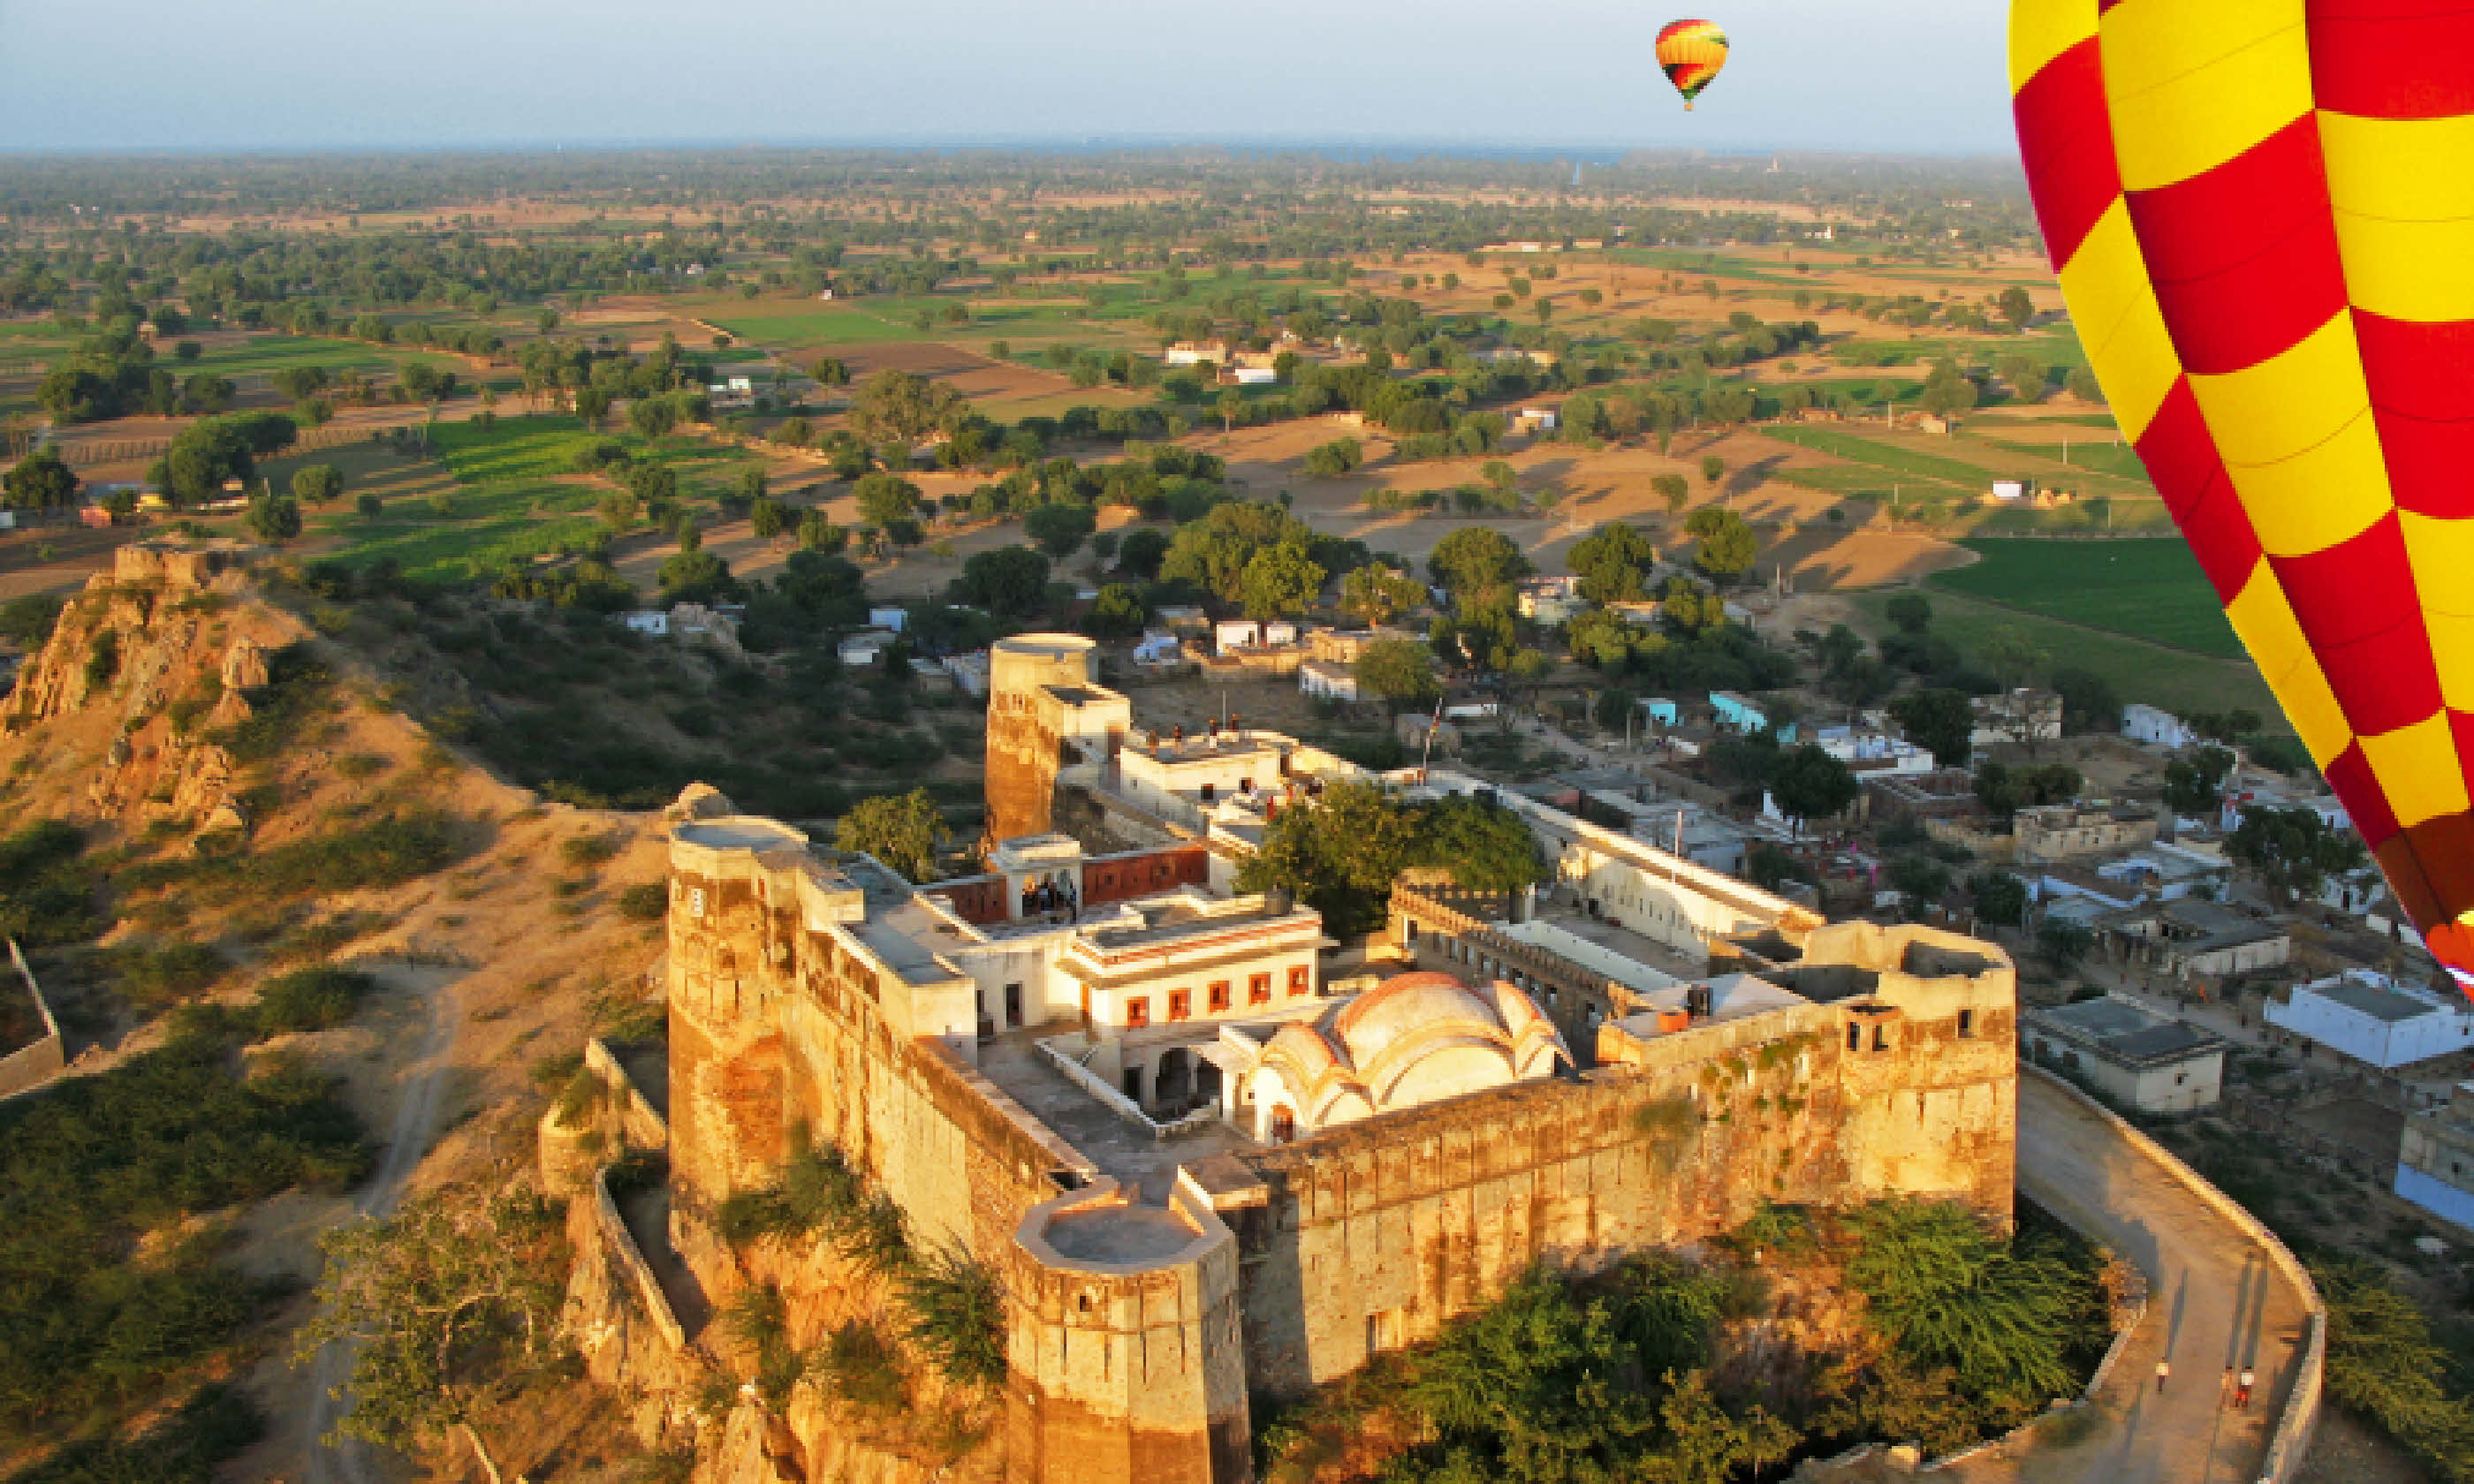 Hot air ballooning over Jaipur, India (On the Go)